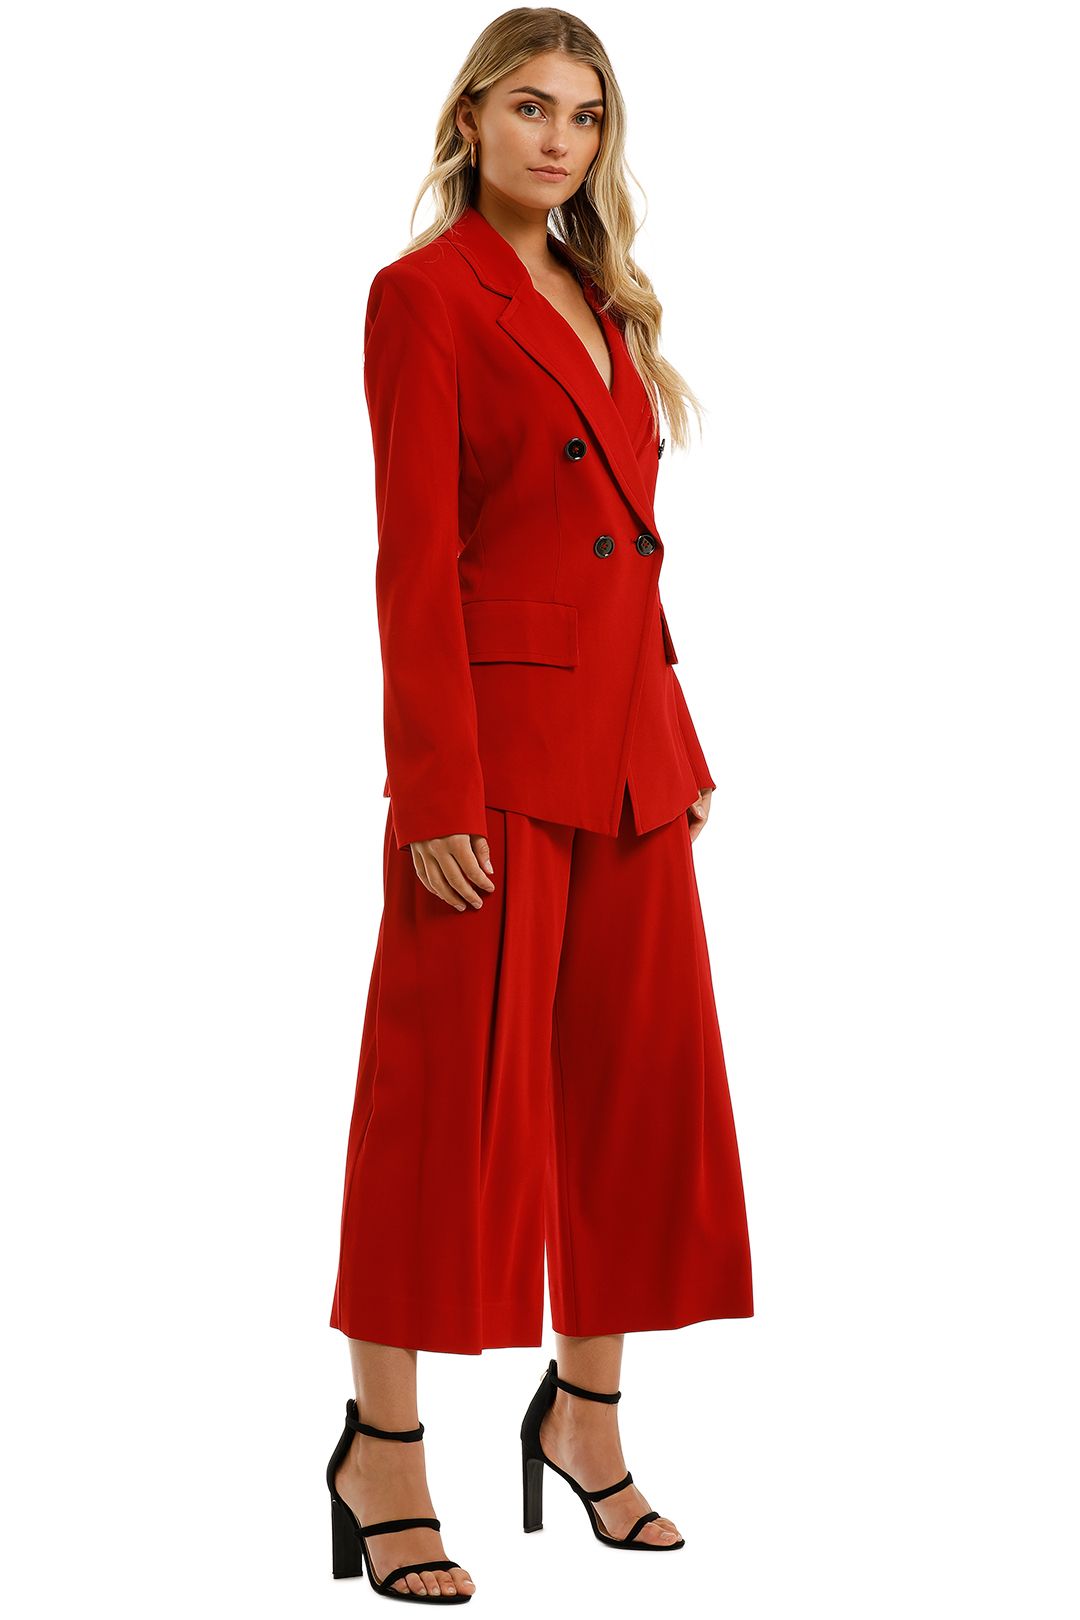 Ginger-and-Smart-Equinox-Jacket-and-Pant-Set-Scarlet-Red-Side